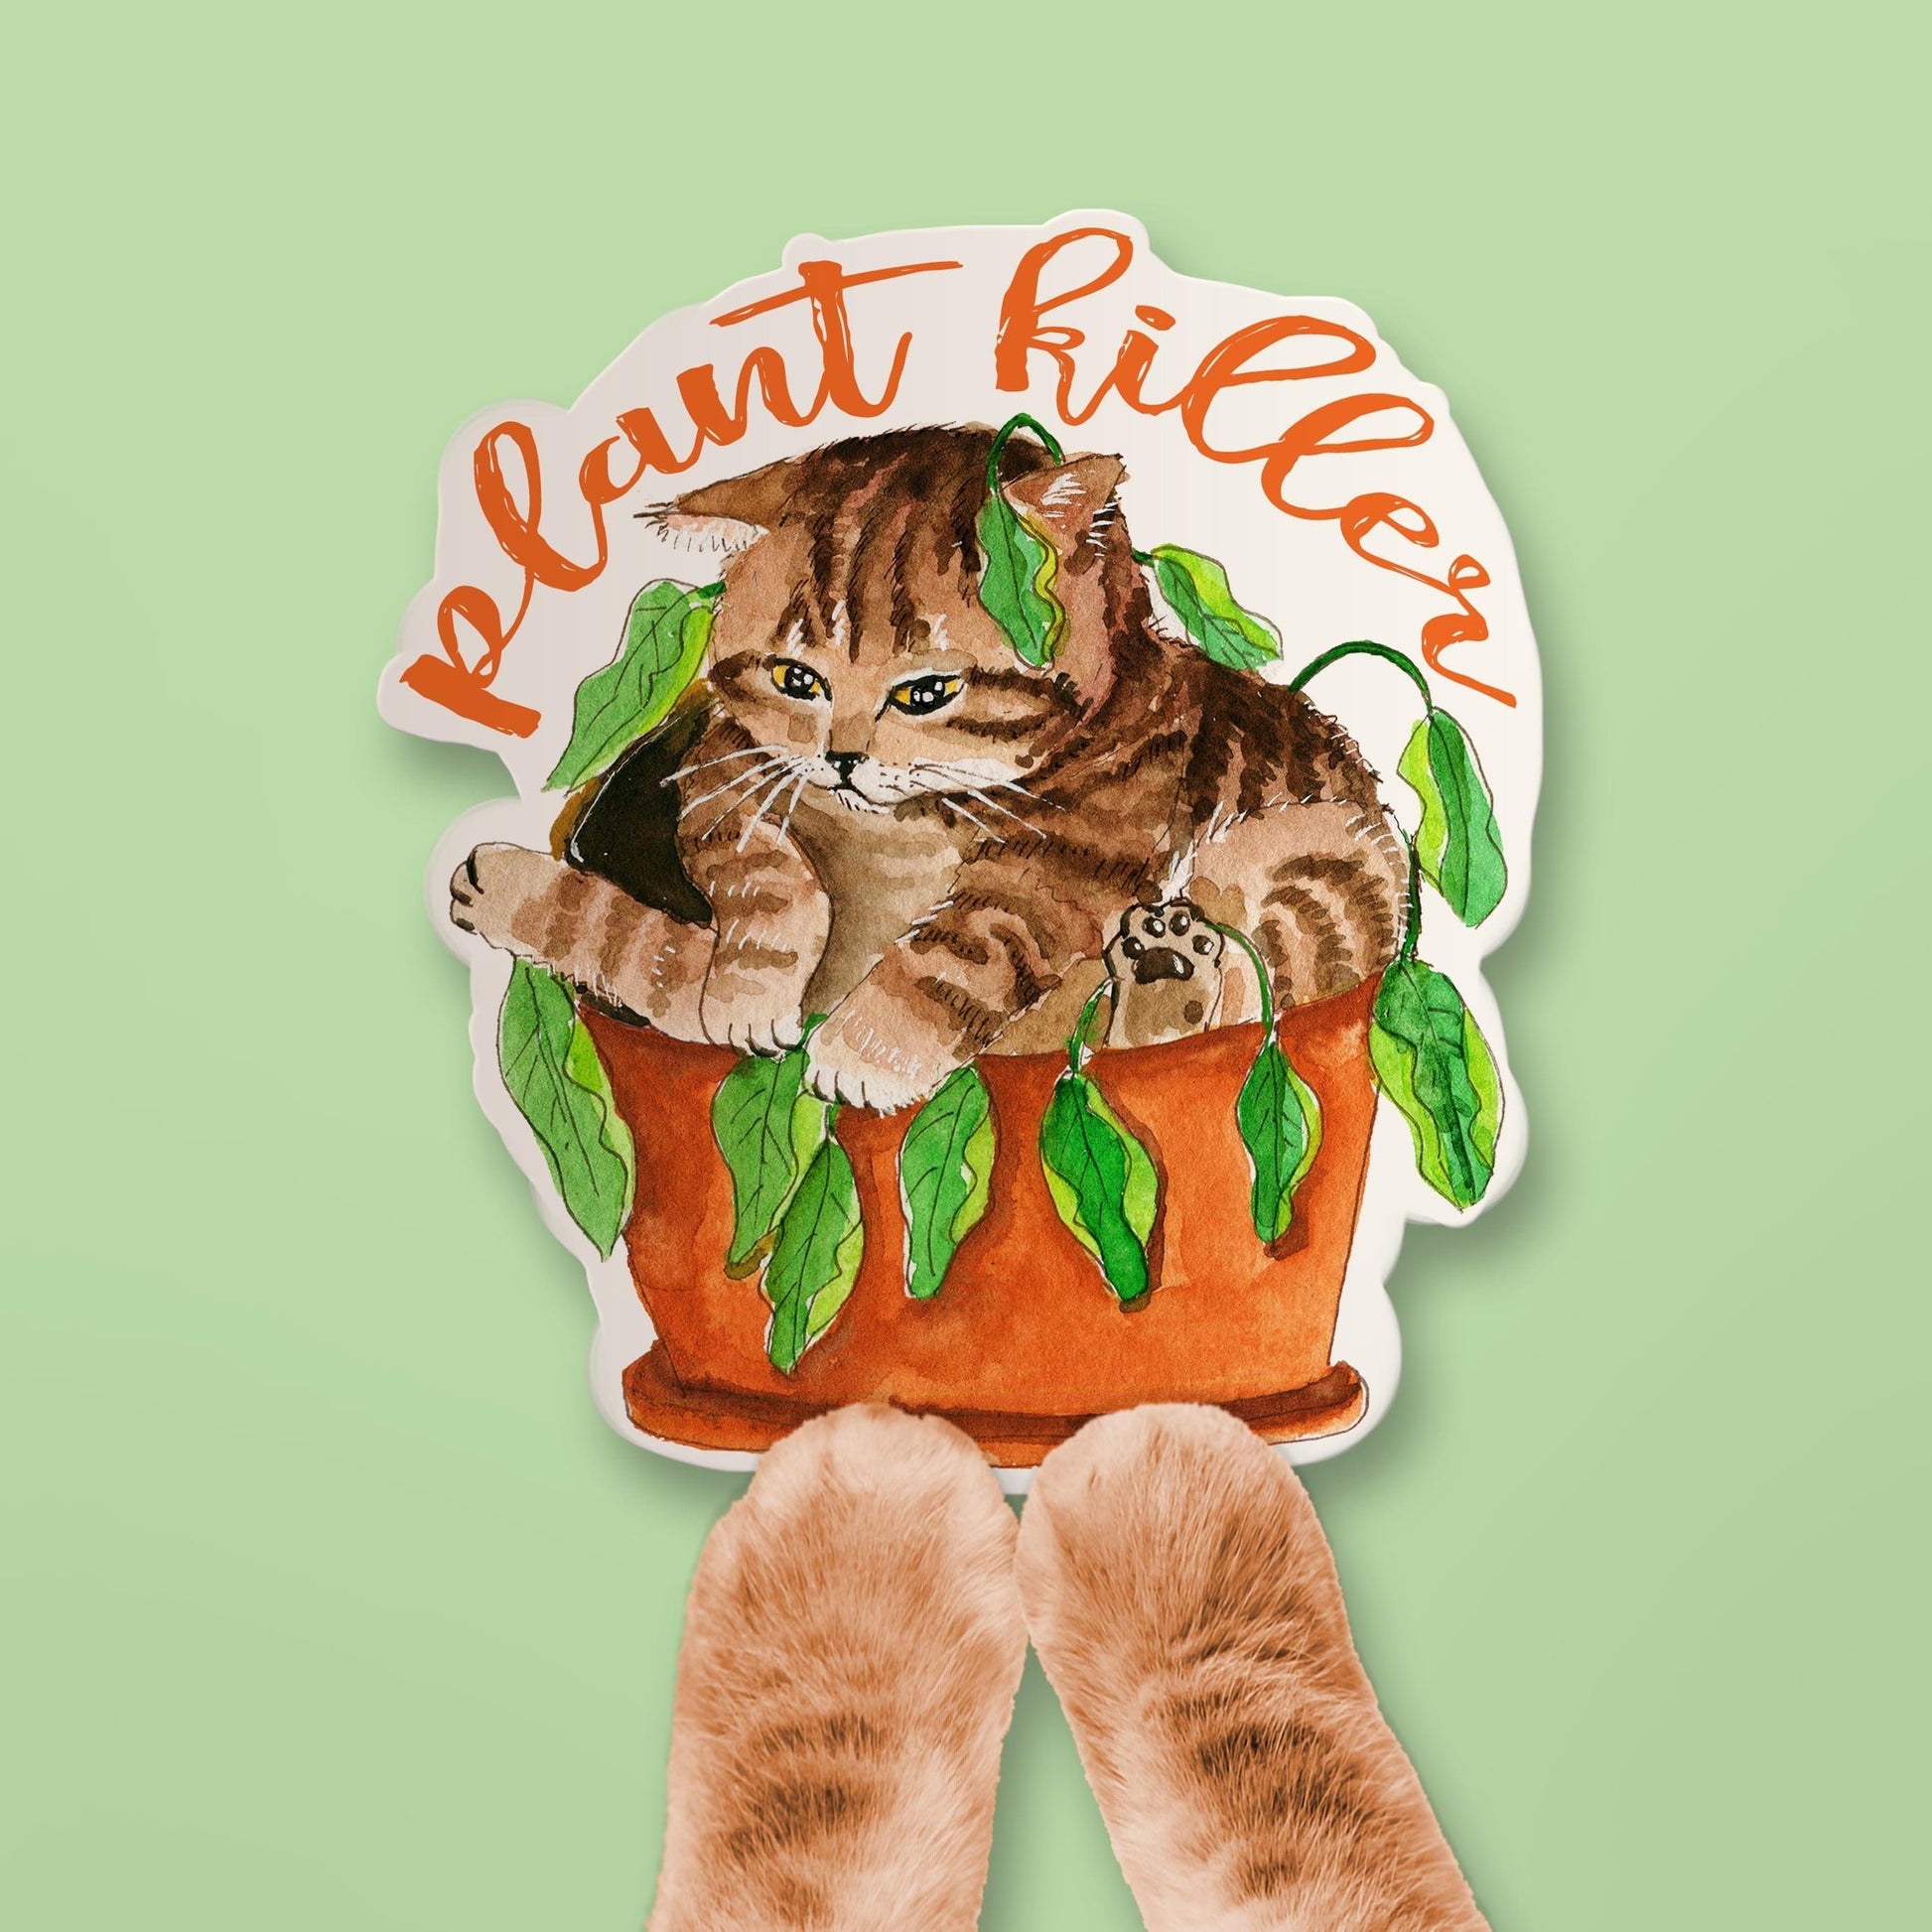 Plant Killer Cat Stickers For Plant Mom - Funny Waterproof Stickers For Cat Lover - Dead Plants Sticker For Gardener Gifts